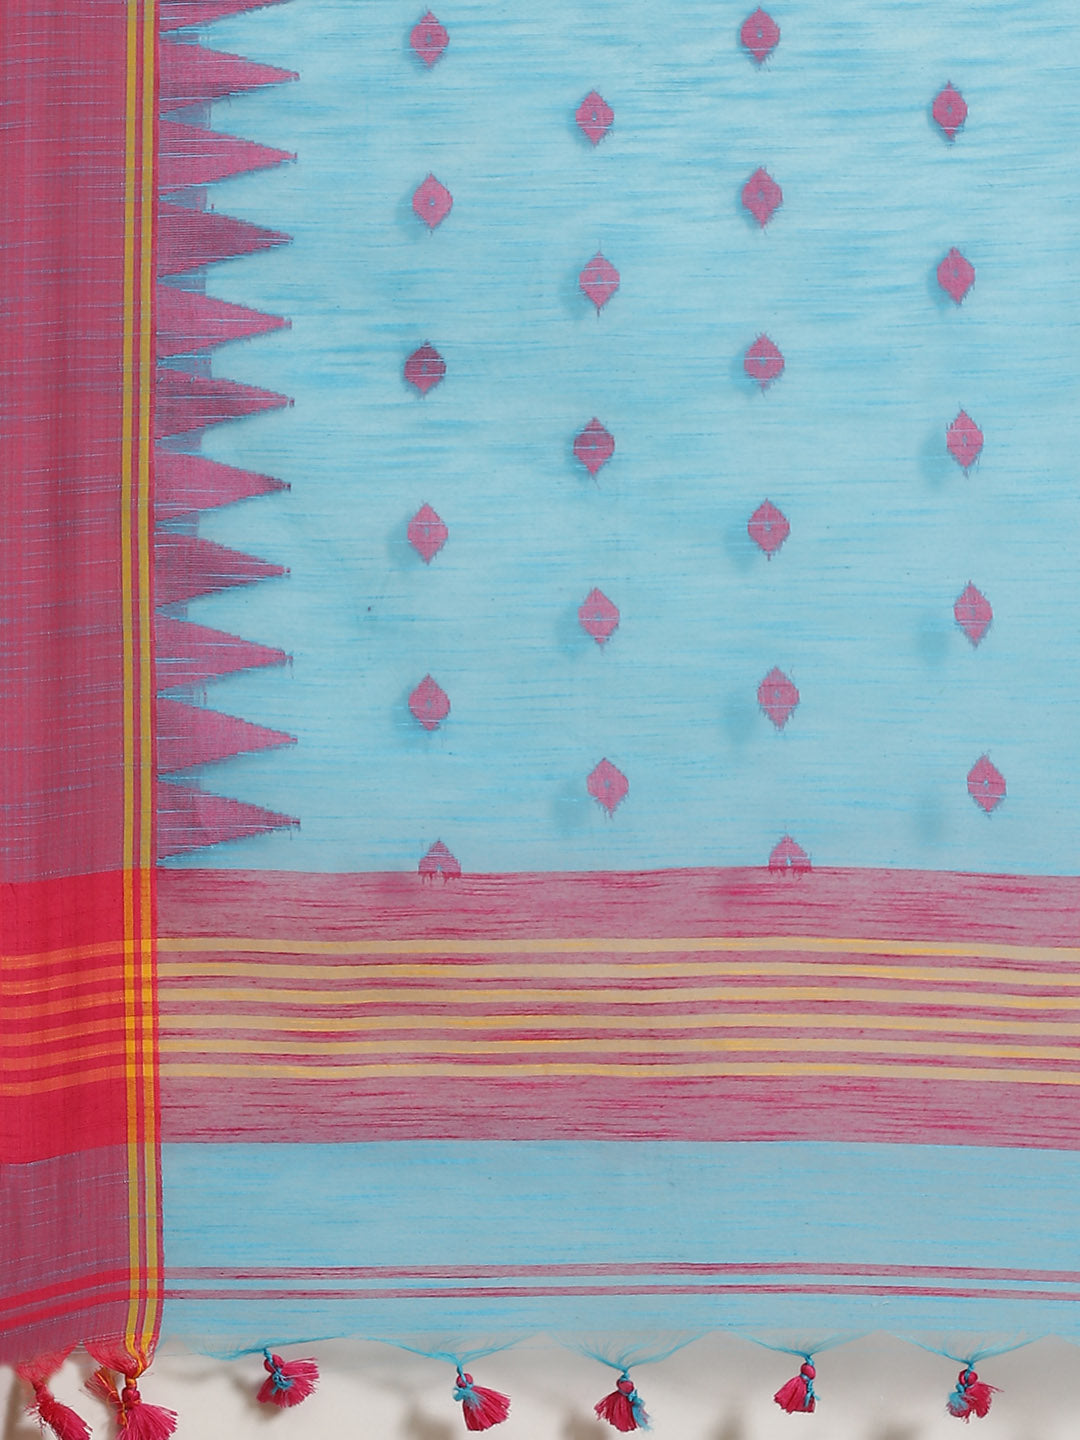 Blue and Pink, Kalakari India Ikat Silk Cotton Woven Design Saree with Blouse SHBESA0037-Saree-Kalakari India-SHBESA0037-Bengal, Cotton, Geographical Indication, Hand Crafted, Heritage Prints, Ikkat, Natural Dyes, Red, Sarees, Sustainable Fabrics, Woven, Yellow-[Linen,Ethnic,wear,Fashionista,Handloom,Handicraft,Indigo,blockprint,block,print,Cotton,Chanderi,Blue, latest,classy,party,bollywood,trendy,summer,style,traditional,formal,elegant,unique,style,hand,block,print, dabu,booti,gift,present,gla